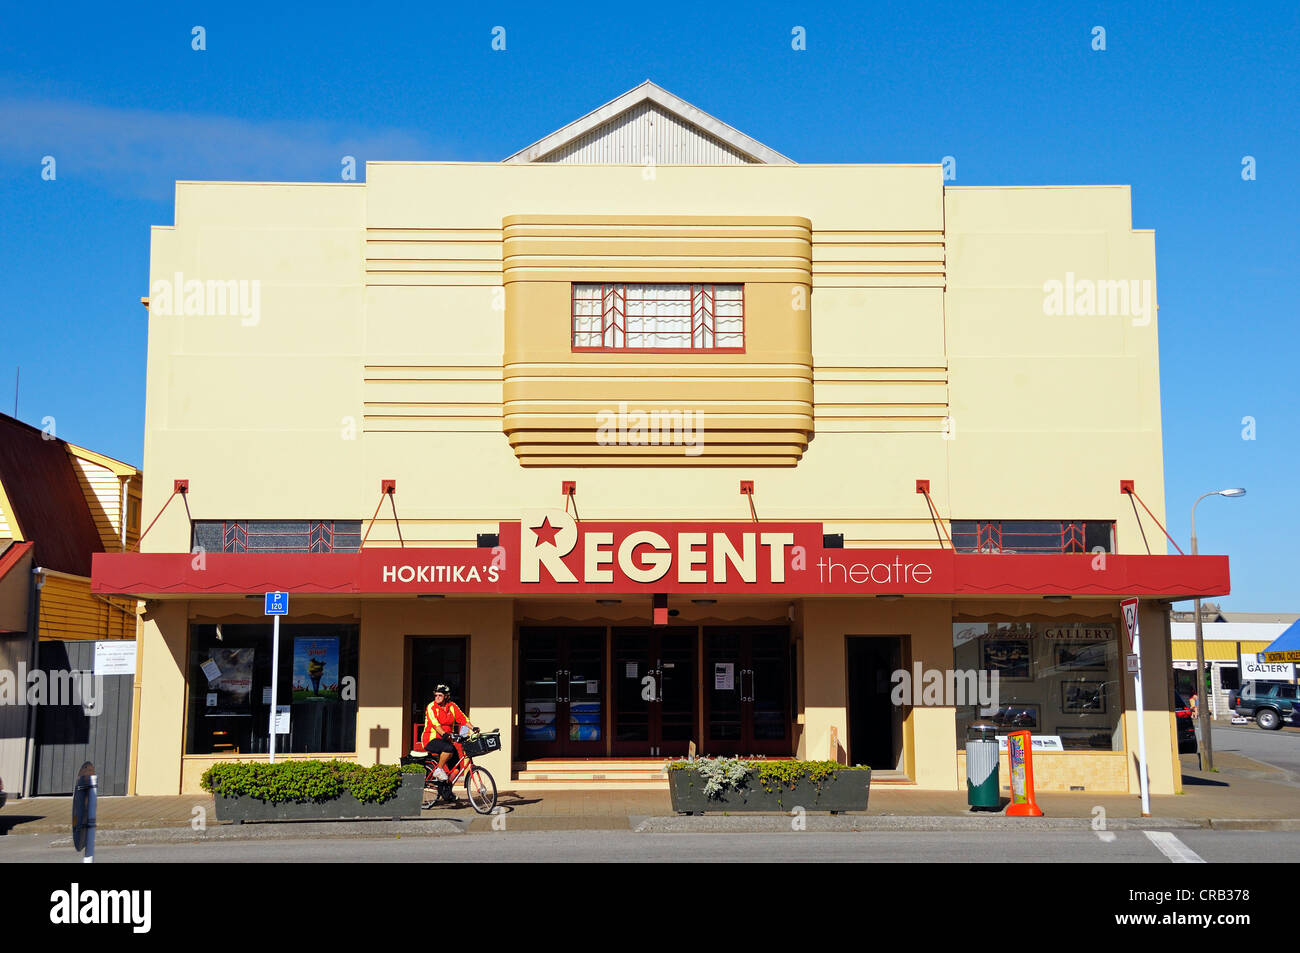 Movie theatre with Art Deco elements in the town of Hokitika, West Coast of the South Island of New Zealand Stock Photo